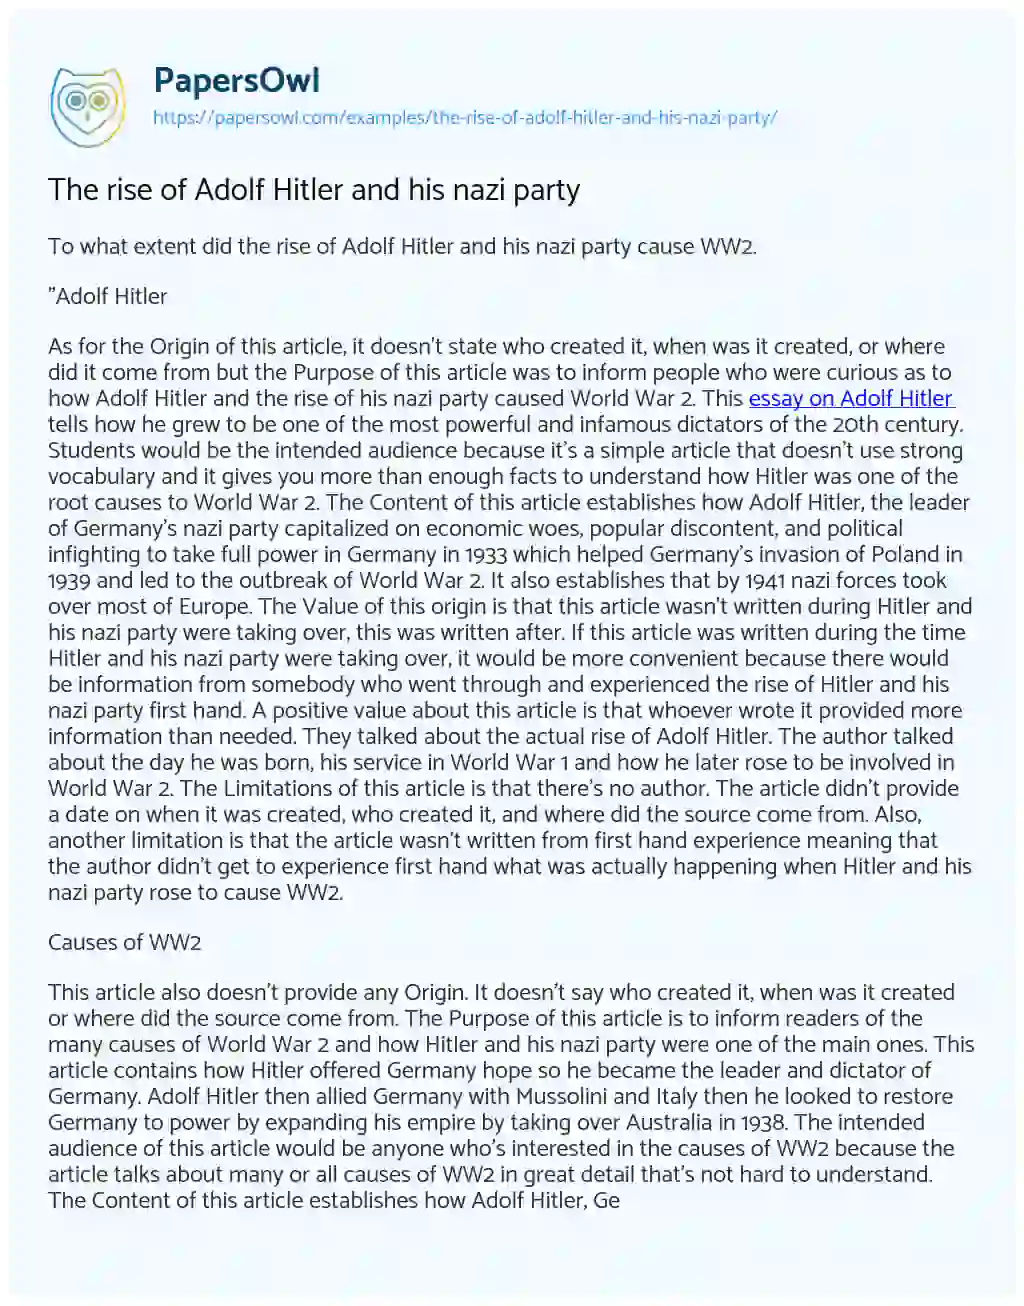 Essay on The Rise of Adolf Hitler and his Nazi Party